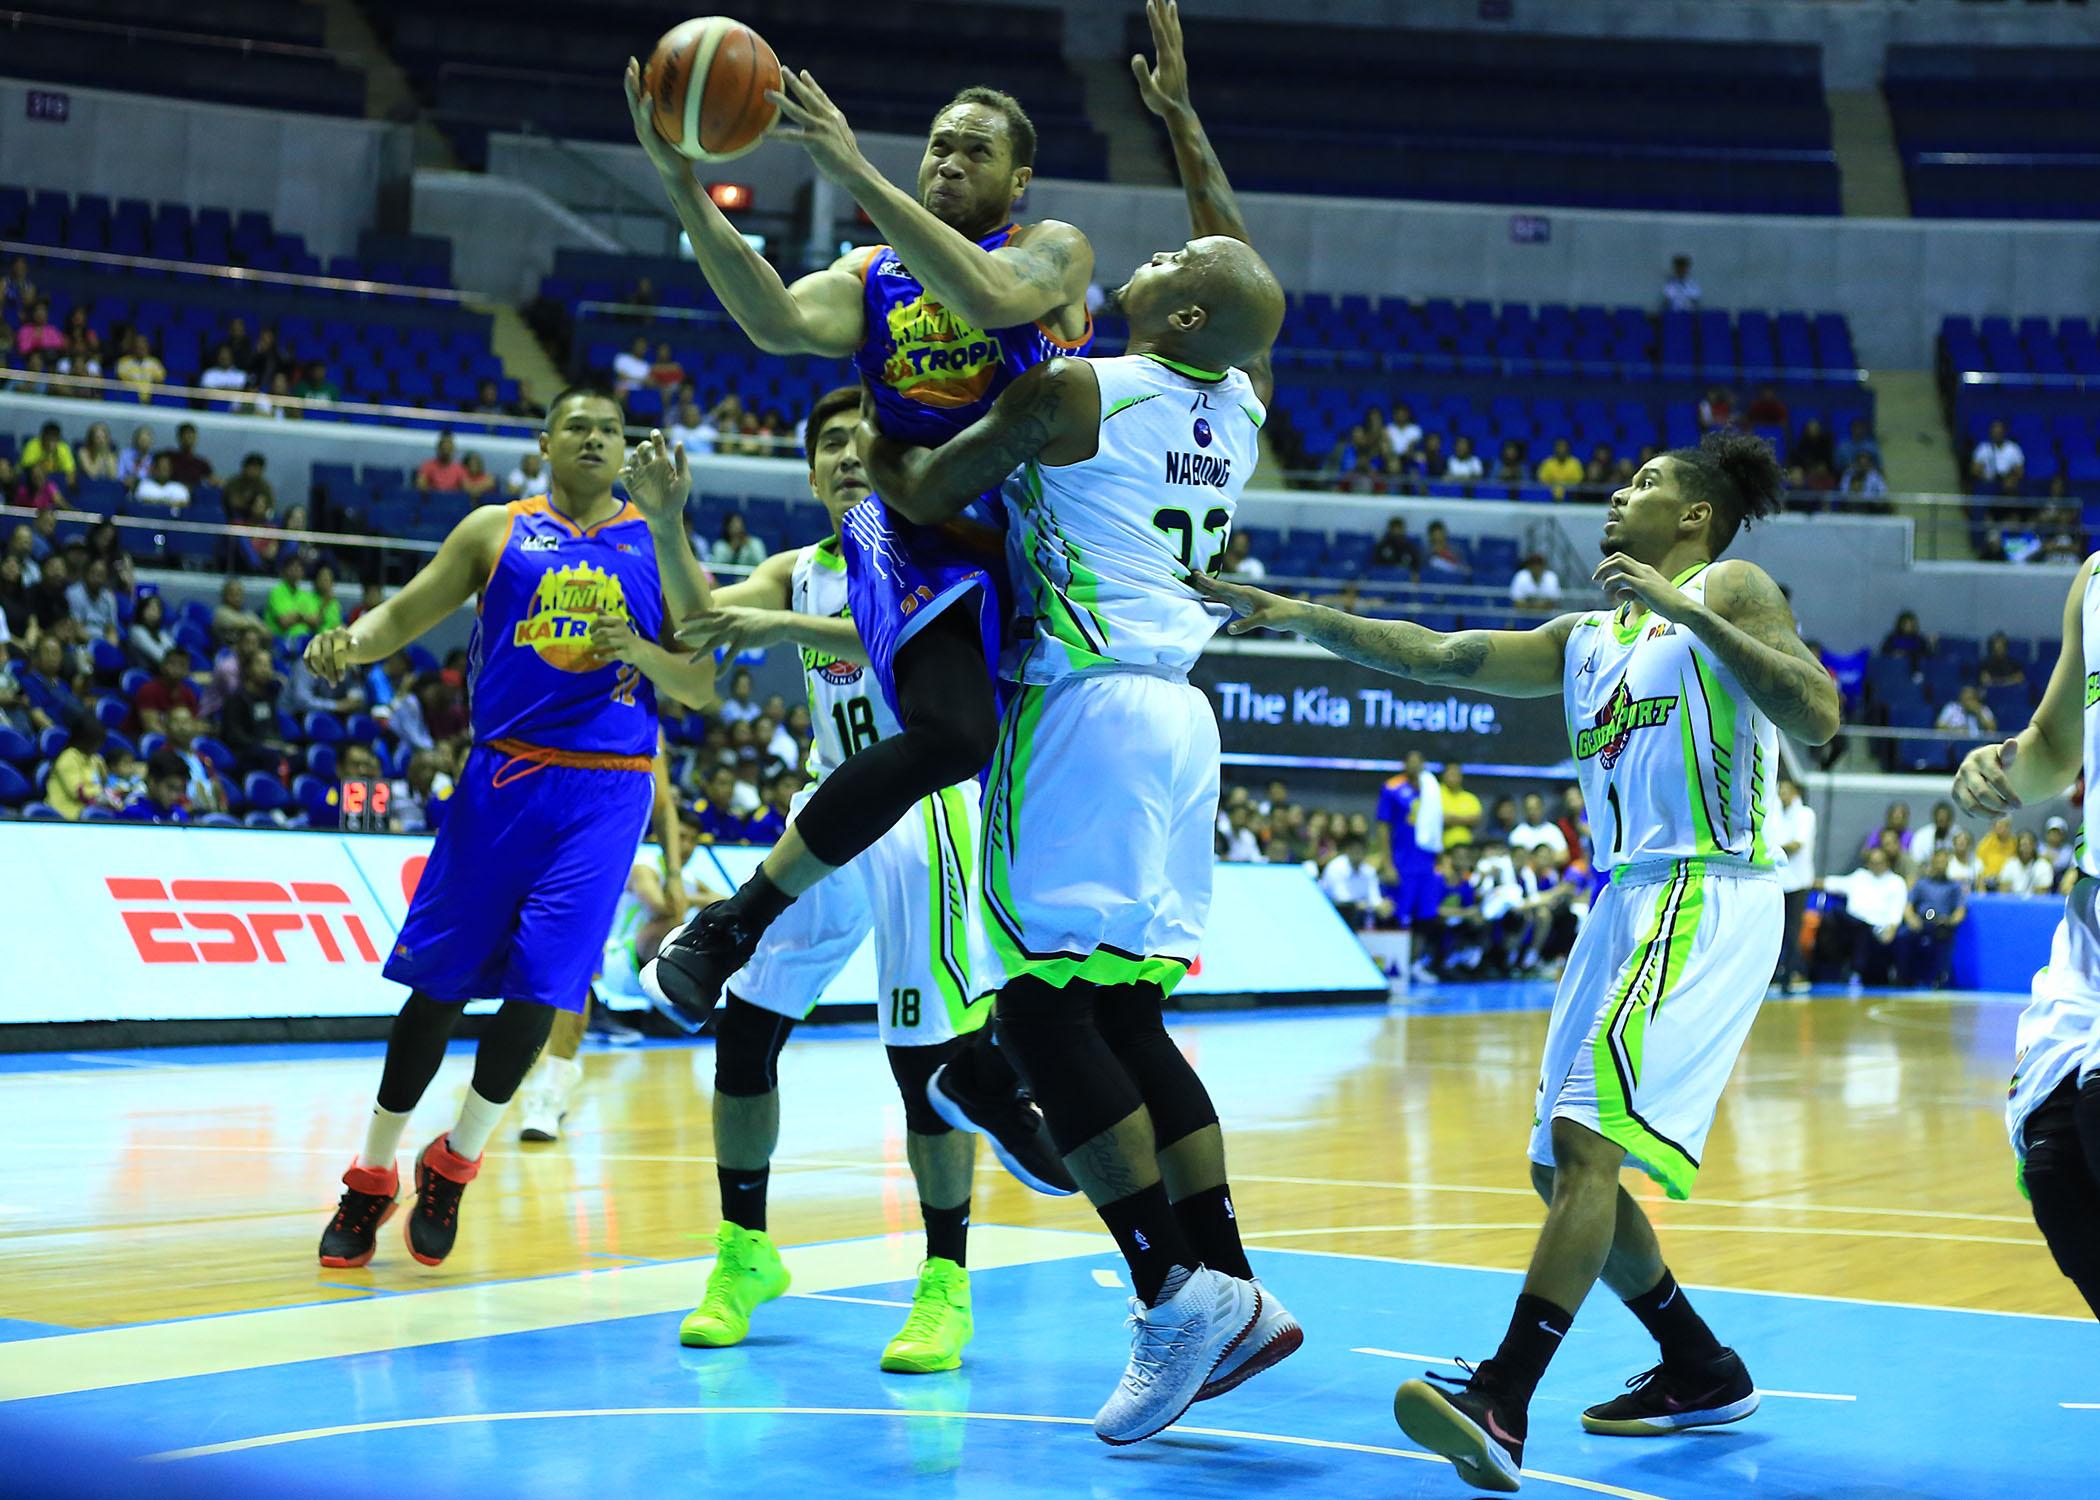 TNT's Kelly Williams of TNT goes for a shot against the defense of Globalport's Kelly Nabong at the Araneta Coliseum on Wednesday, February 14, 2018. Batang Pier took the match 99-84. PHOTO BY KC CRUZ